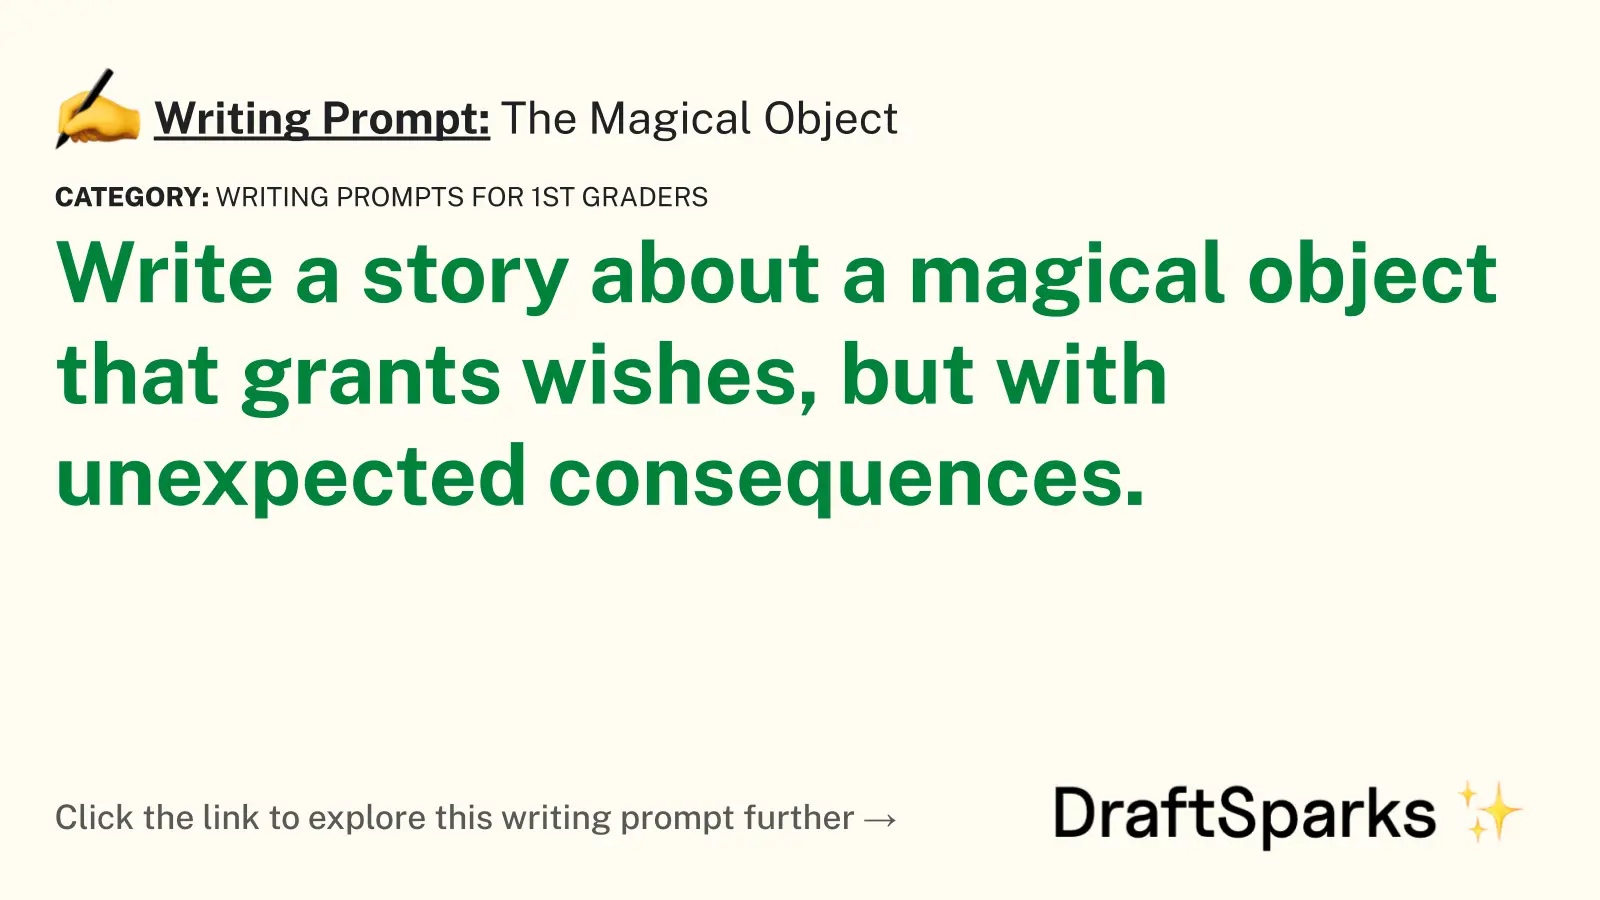 The Magical Object